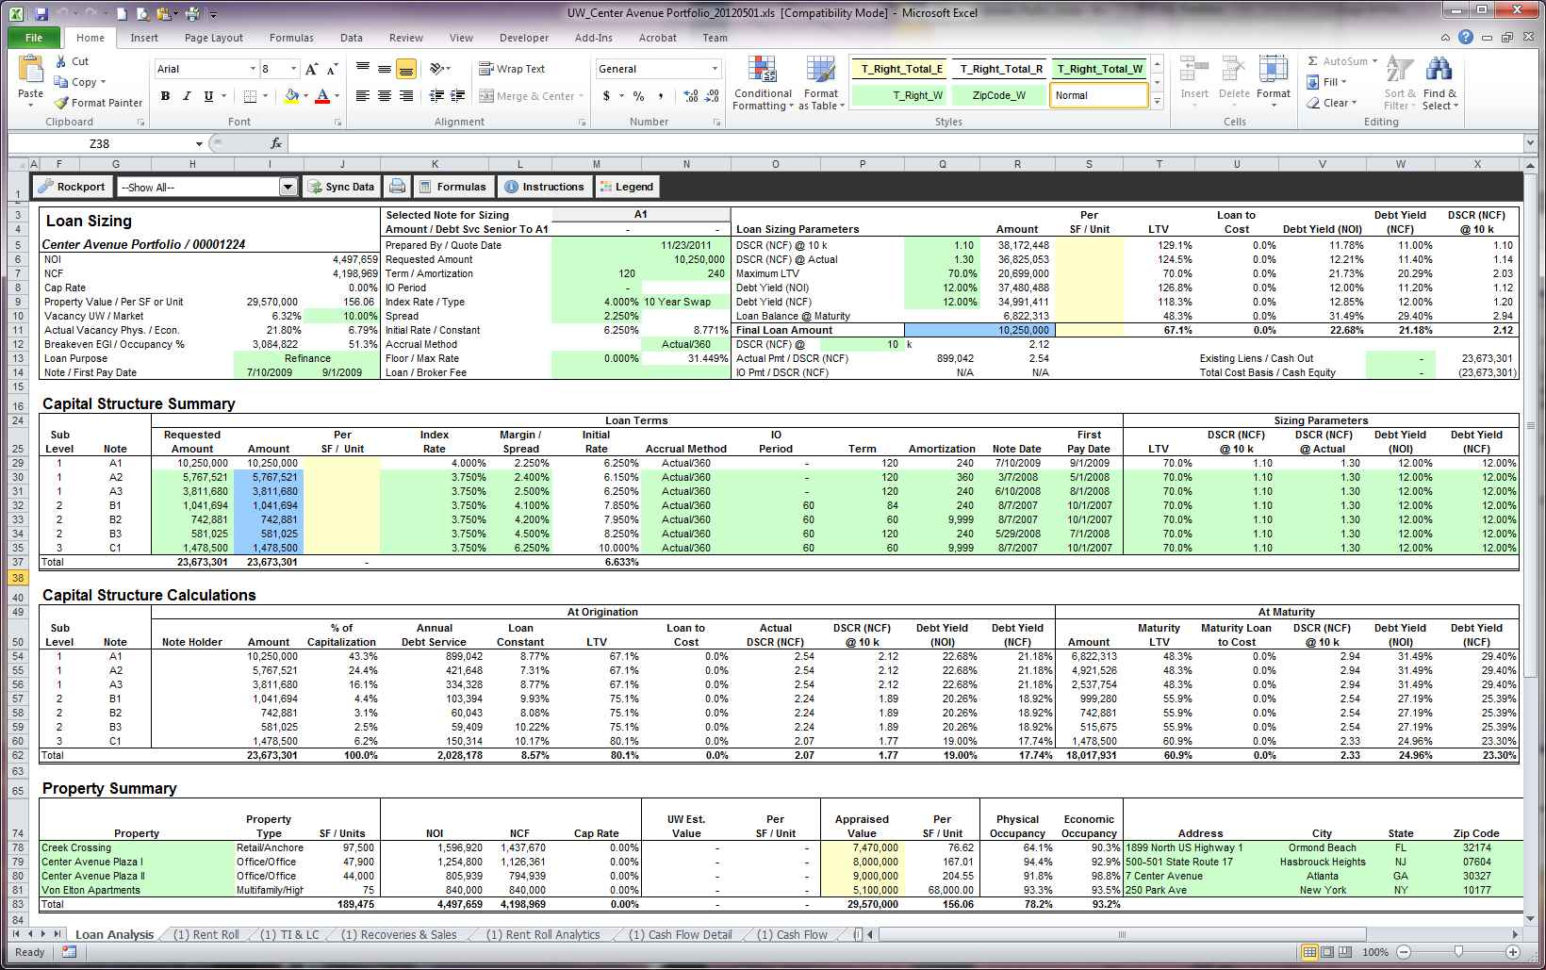 real-estate-investment-analysis-excel-spreadsheet-db-excel-com-riset